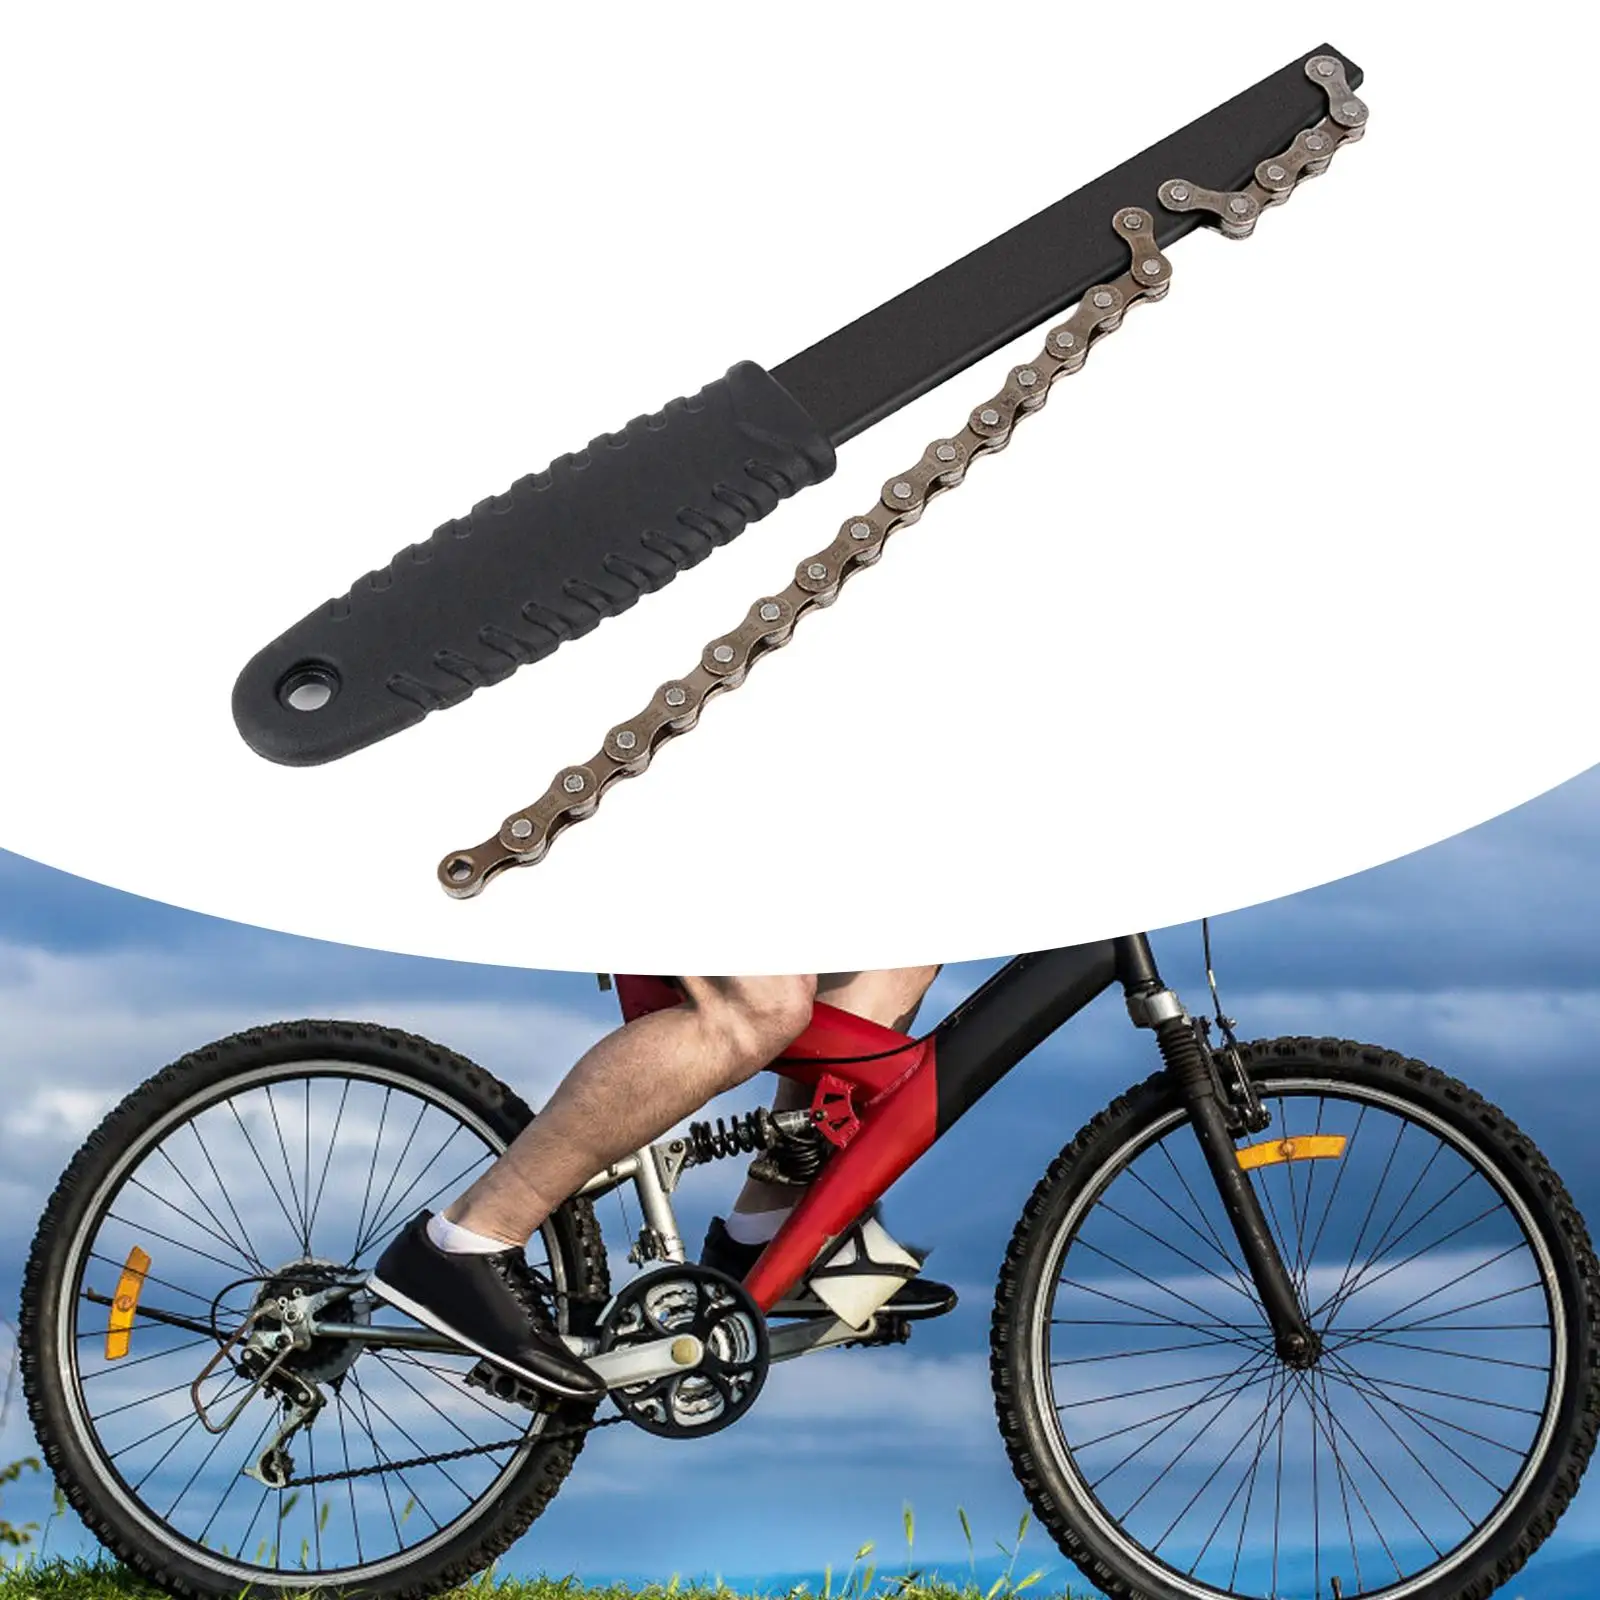 Flywheel Wrench Universal High Quality Hand Tool Wheel Disassembly with Chain Whip Cassette Removal Tool for Mountain Bike